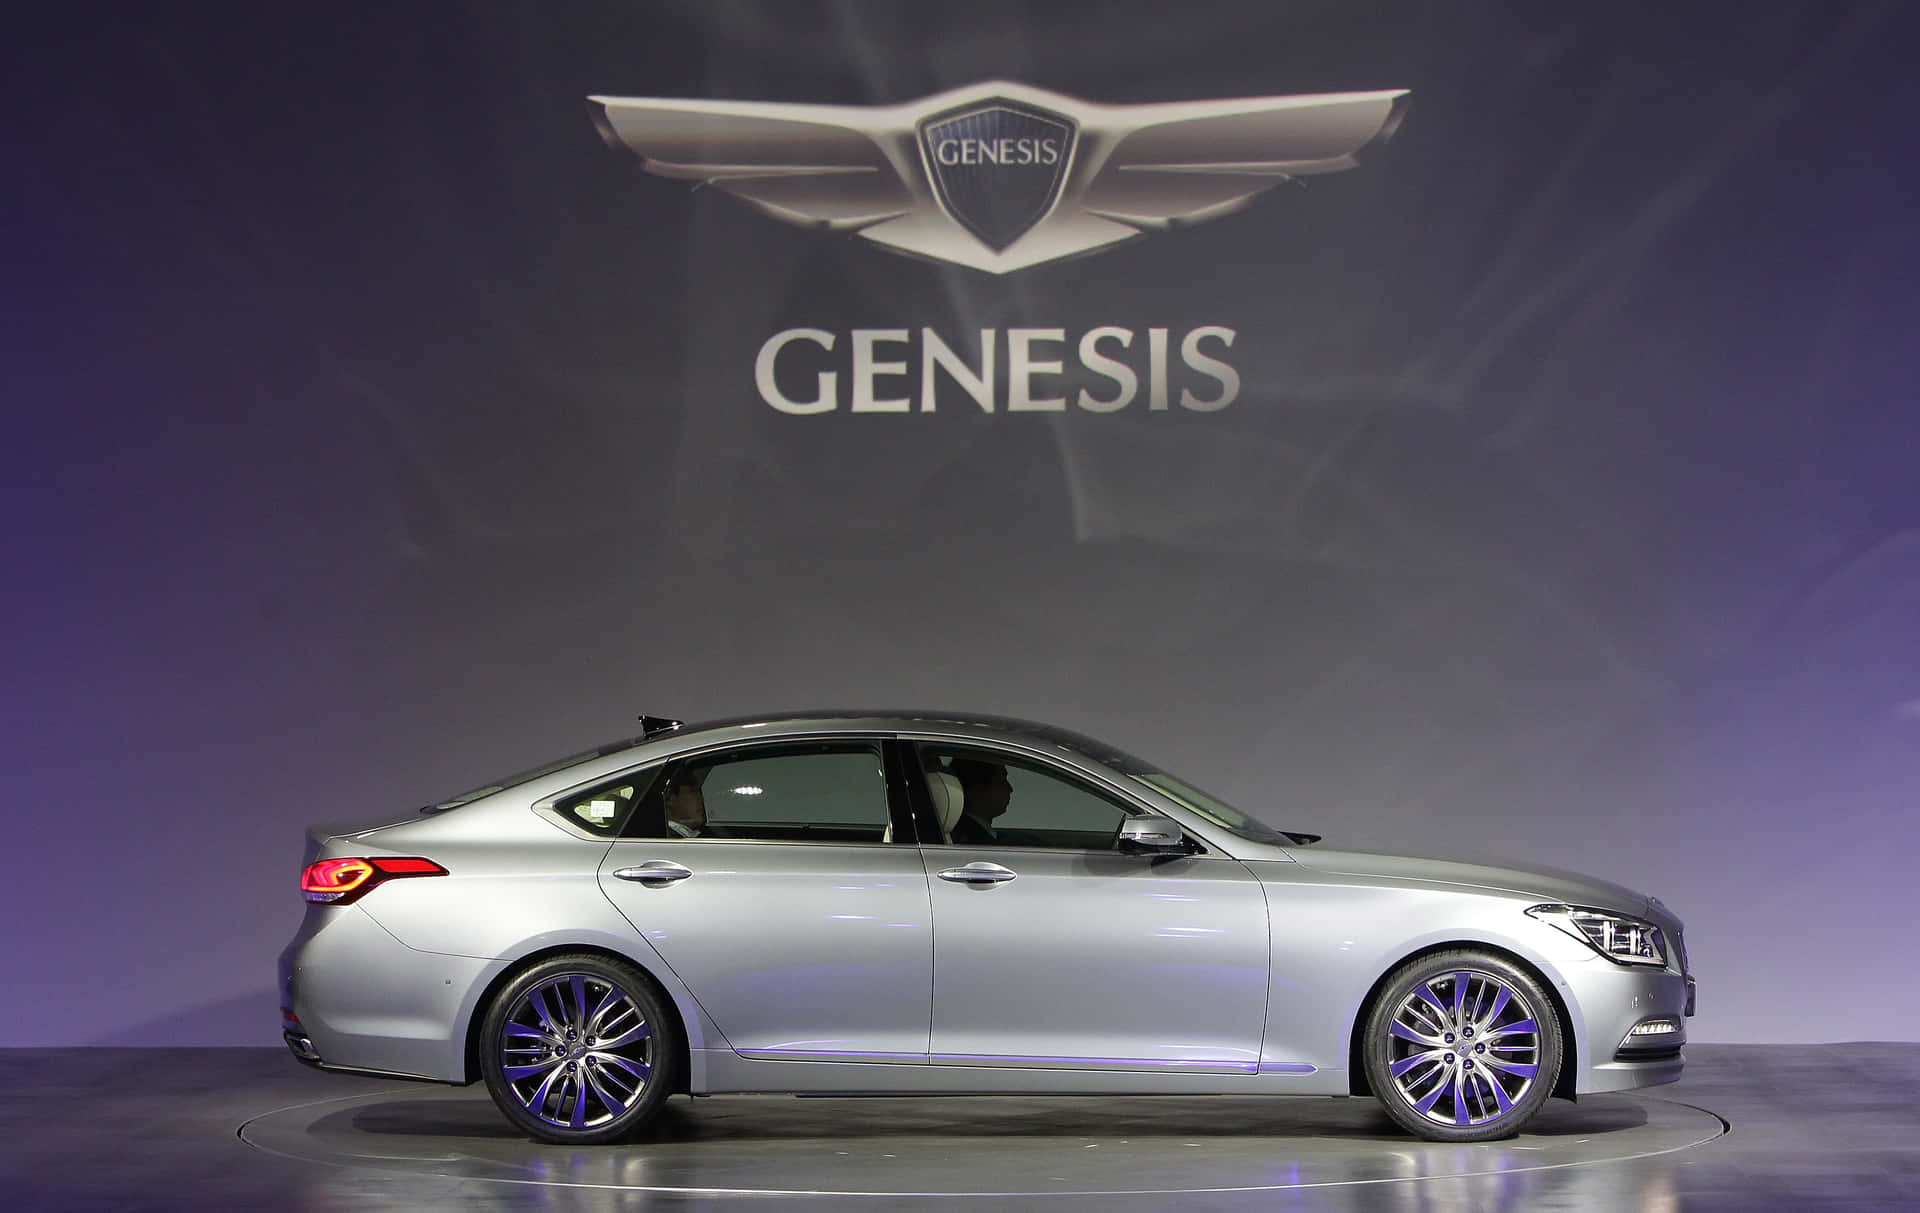 A Silver Genesis Sedan Is On Display At An Auto Show